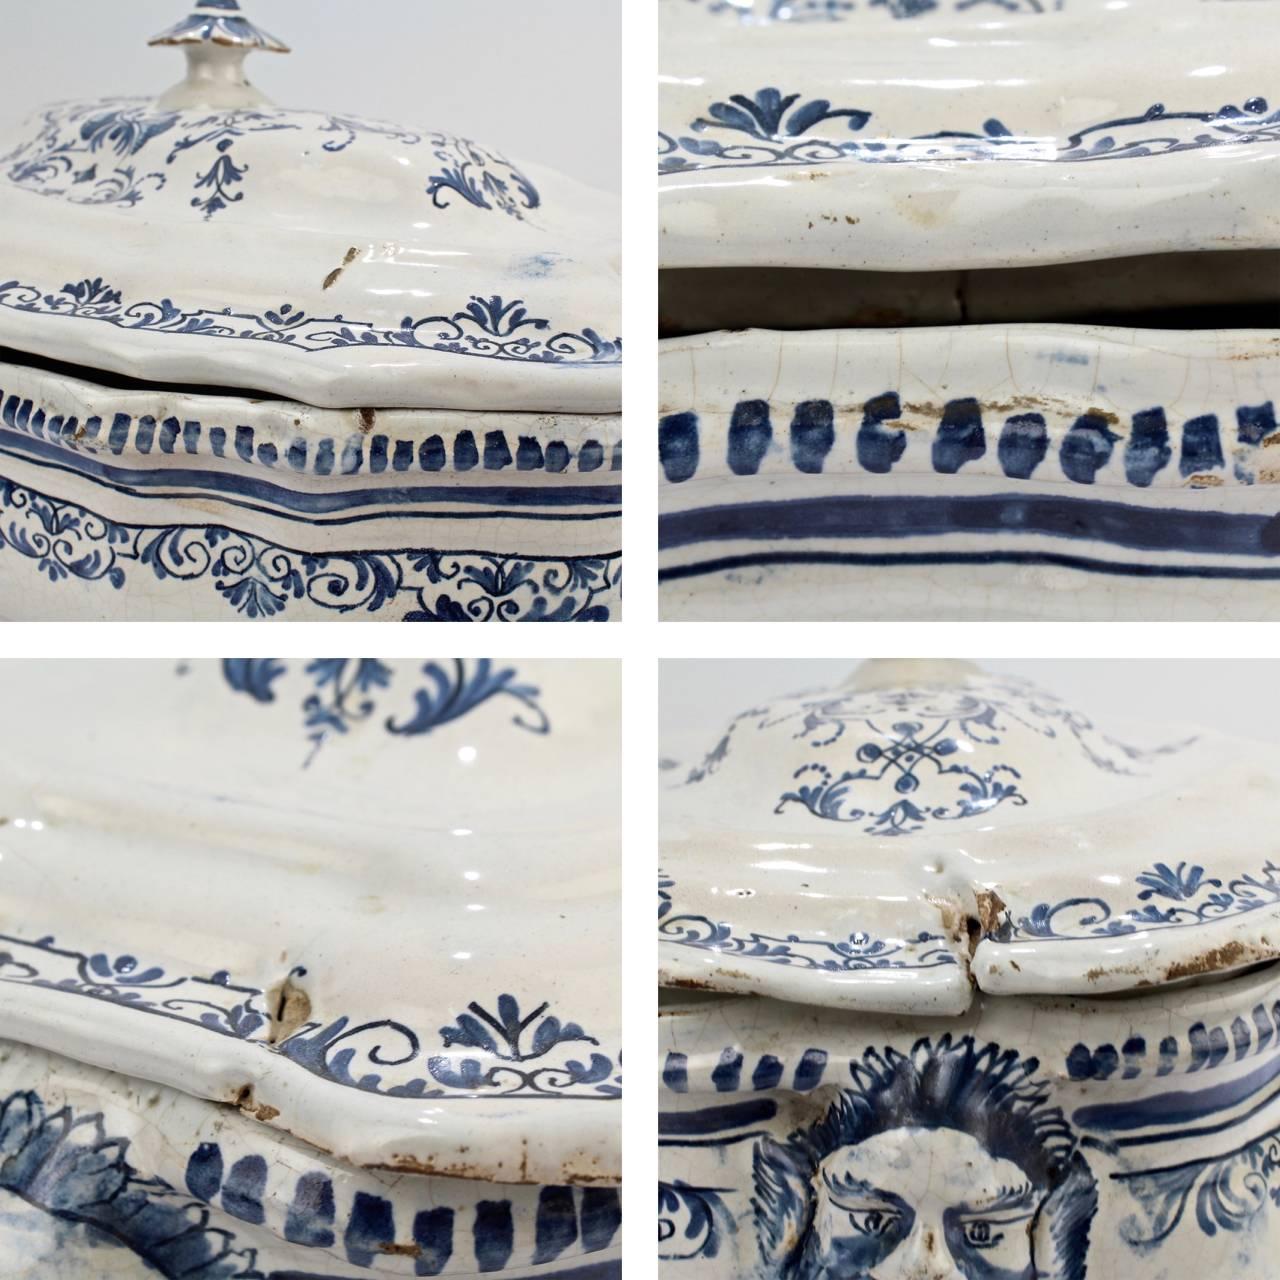 Large Antique 18th Century Moustiers Style French Faience Soup Tureen For Sale 2